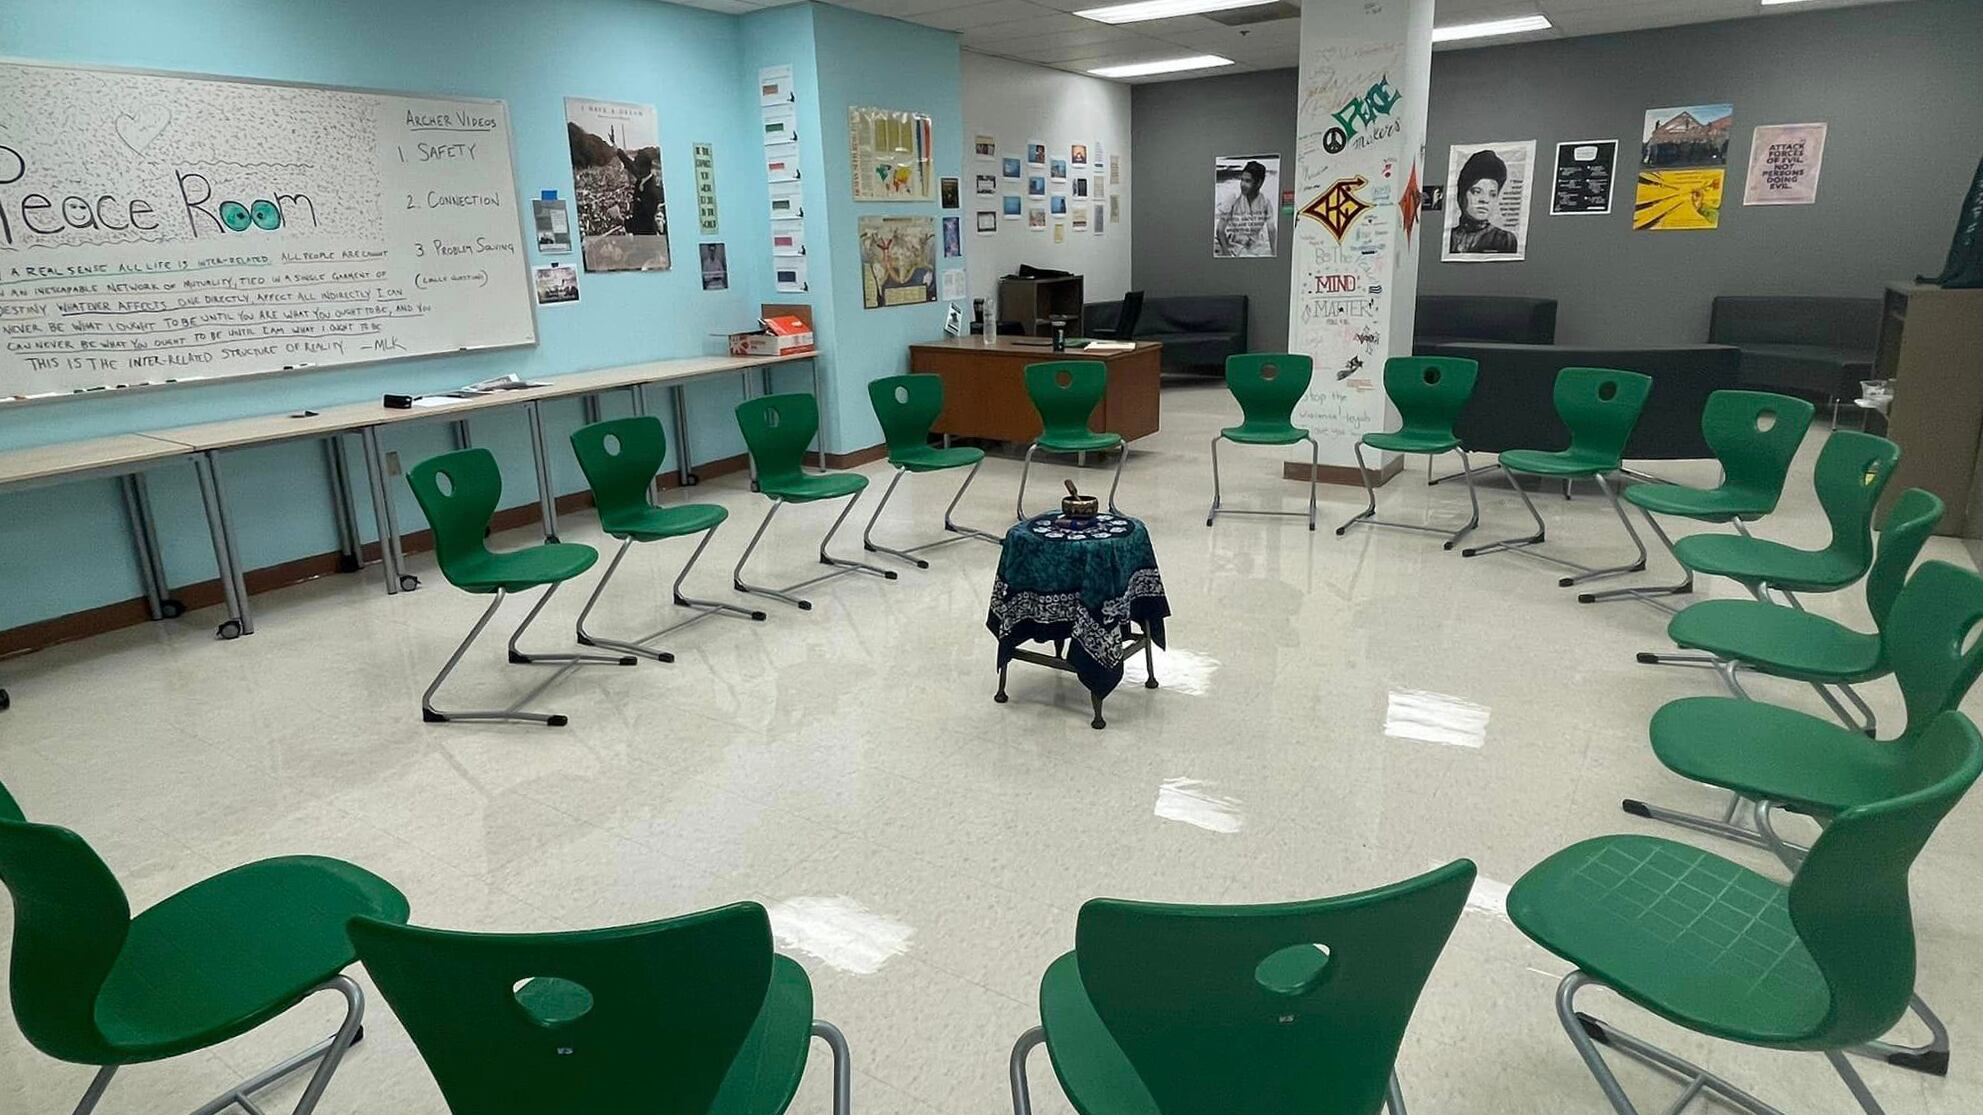 Several green chairs are arranged in an oval in a room with gray walls and a whiteboard.